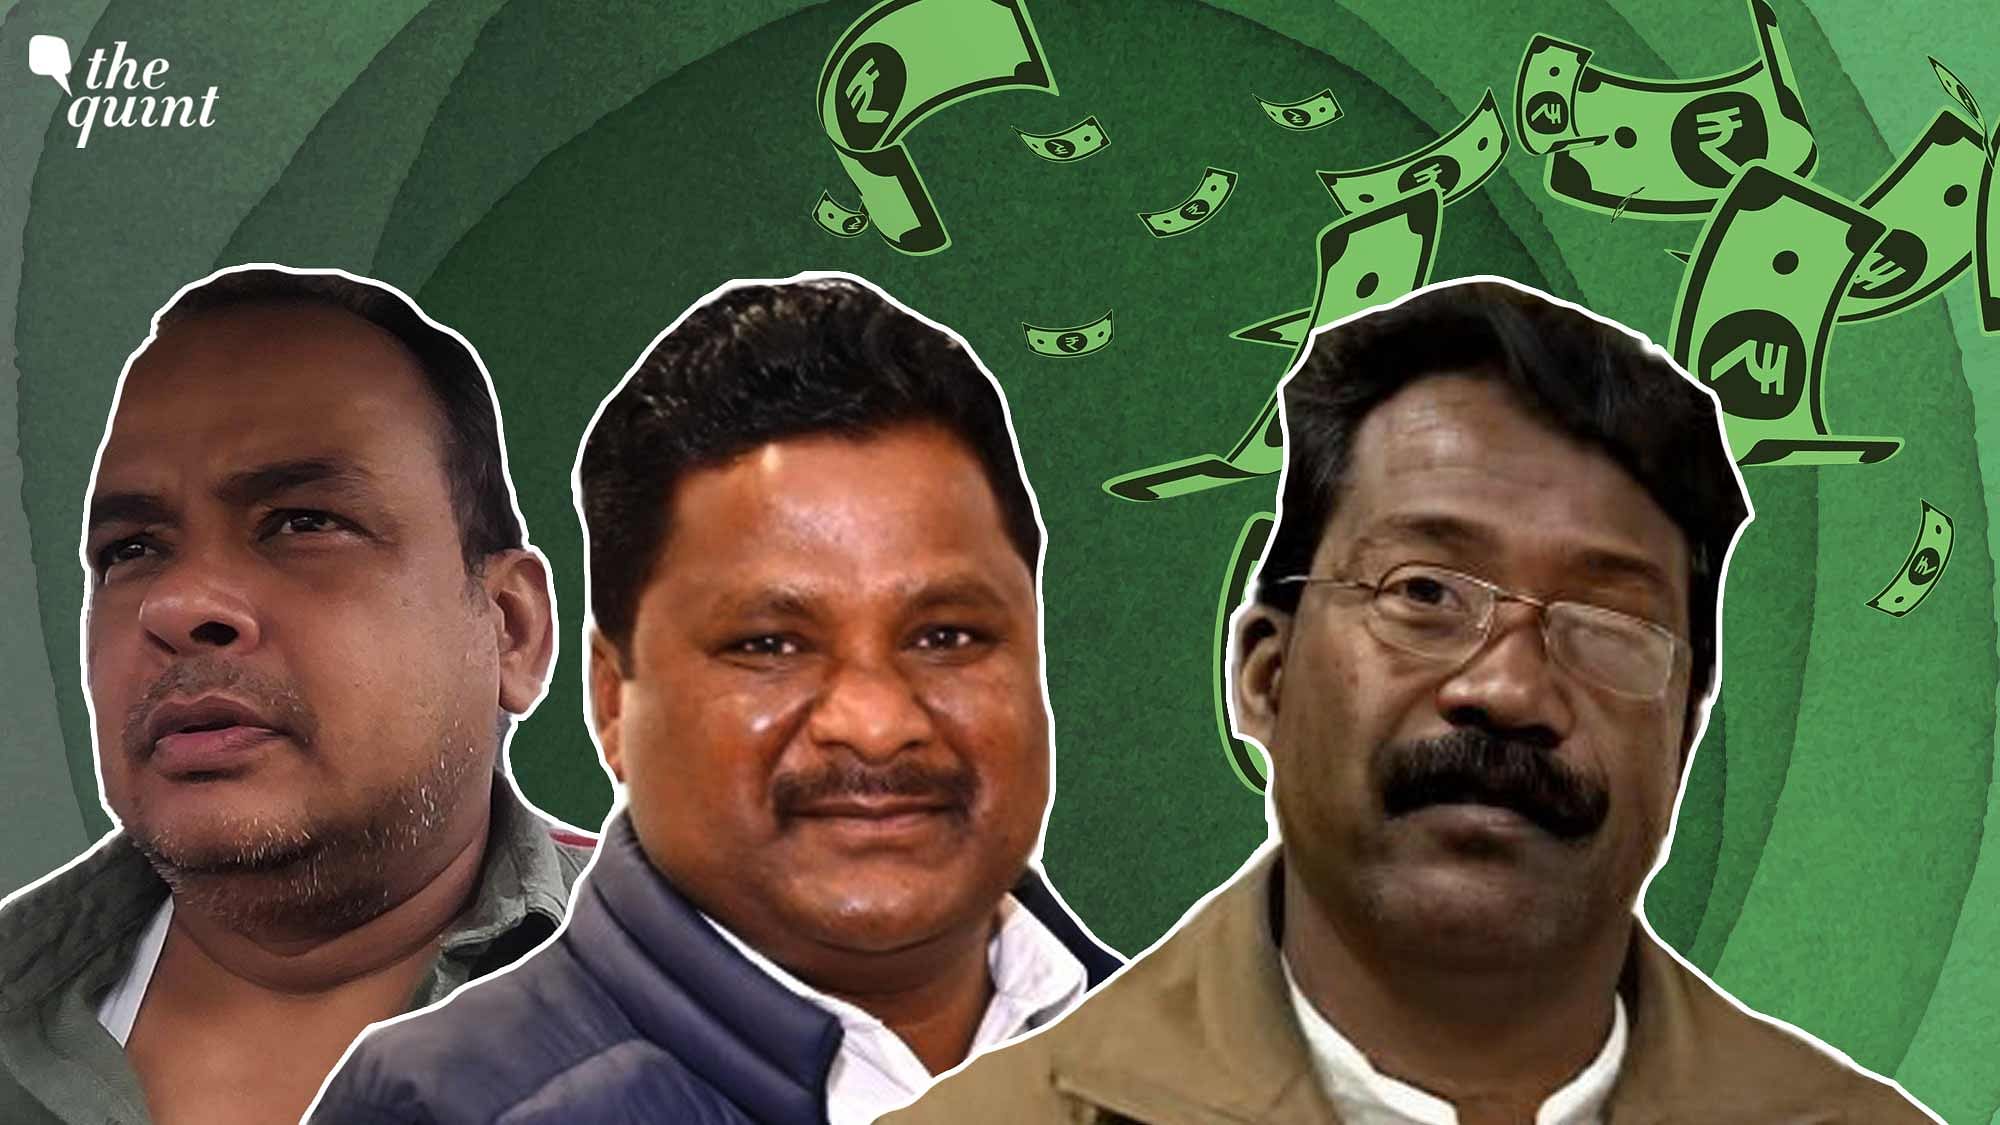 <div class="paragraphs"><p><a href="https://www.thequint.com/news/hot-news/3-jharkhand-congress-mlas-caught-with-huge-amount-of-cash-in-car-in-west-bengal#read-more">Irfan Ansari, Rajesh Kachhap, and Naman Bixal</a> – these are the names that have caused turmoil in the Congress and sparked speculation of a possible 'operation lotus' in <a href="https://www.thequint.com/topic/jharkhand">Jharkhand</a>.</p></div>